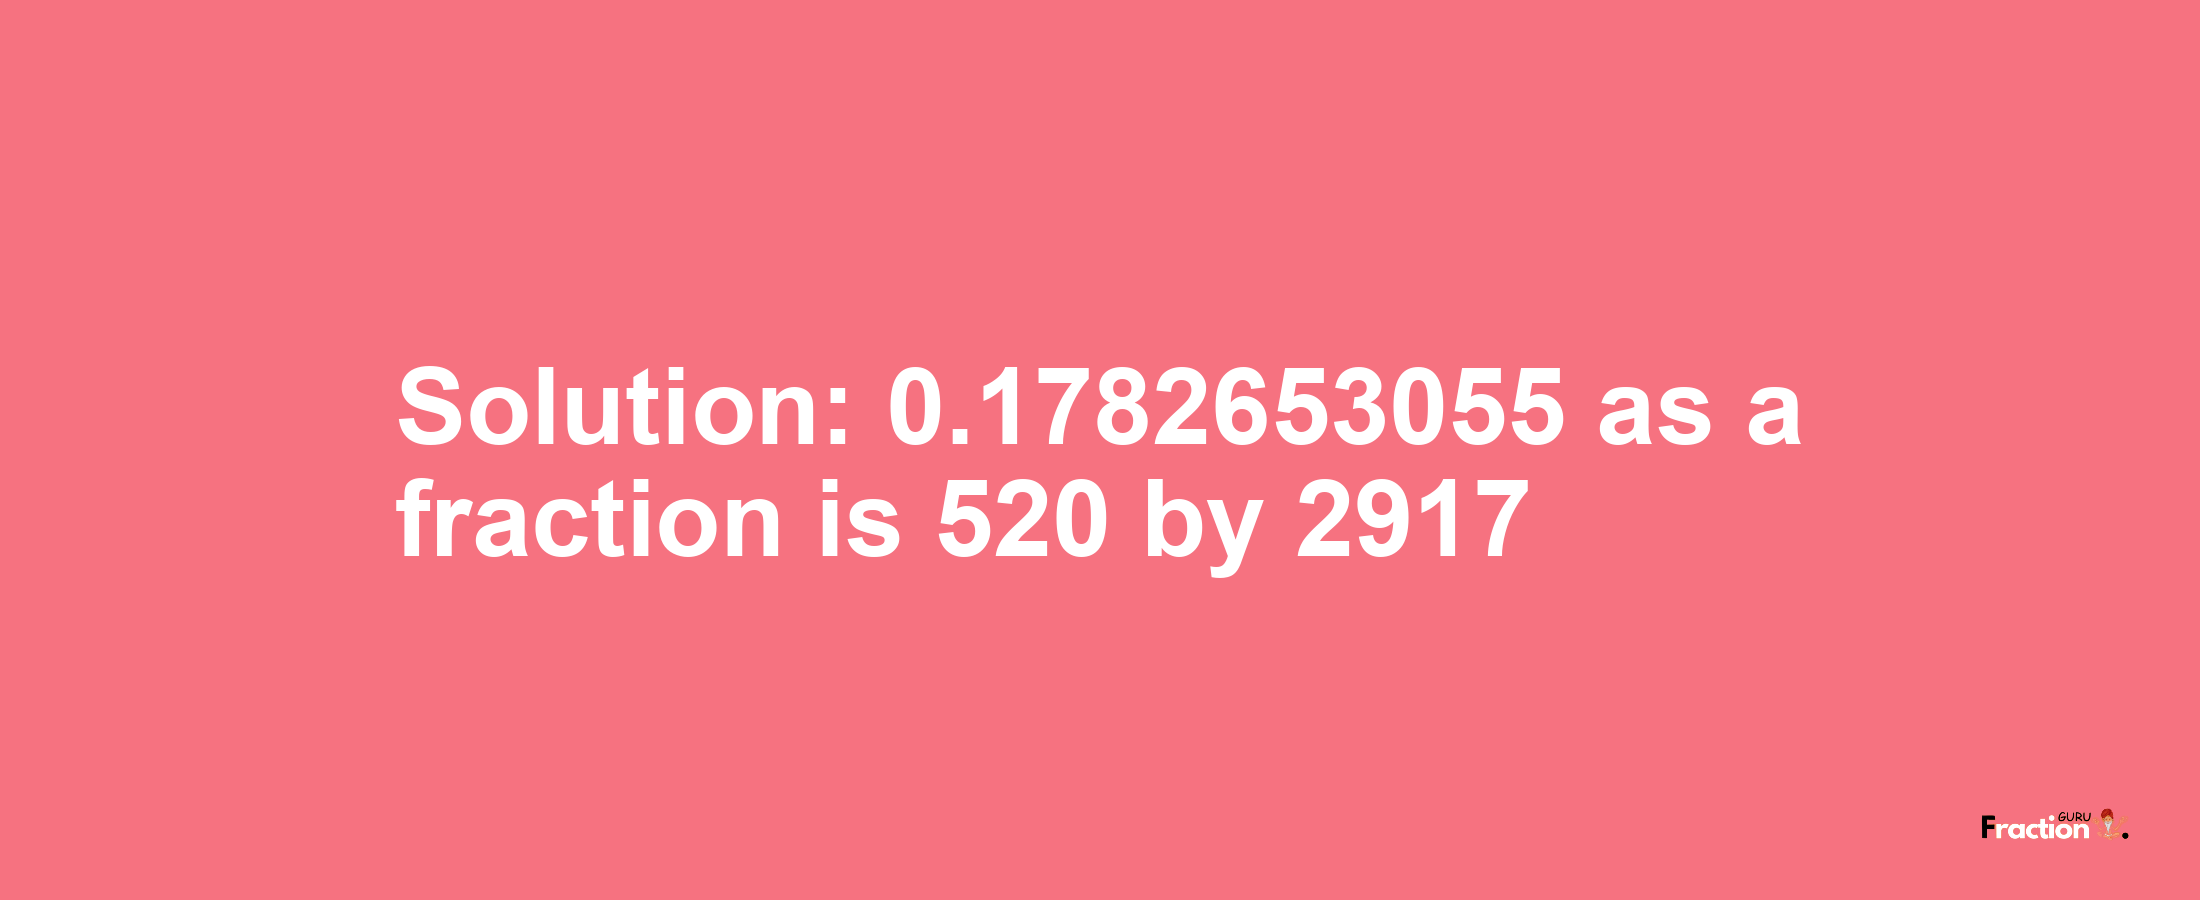 Solution:0.1782653055 as a fraction is 520/2917